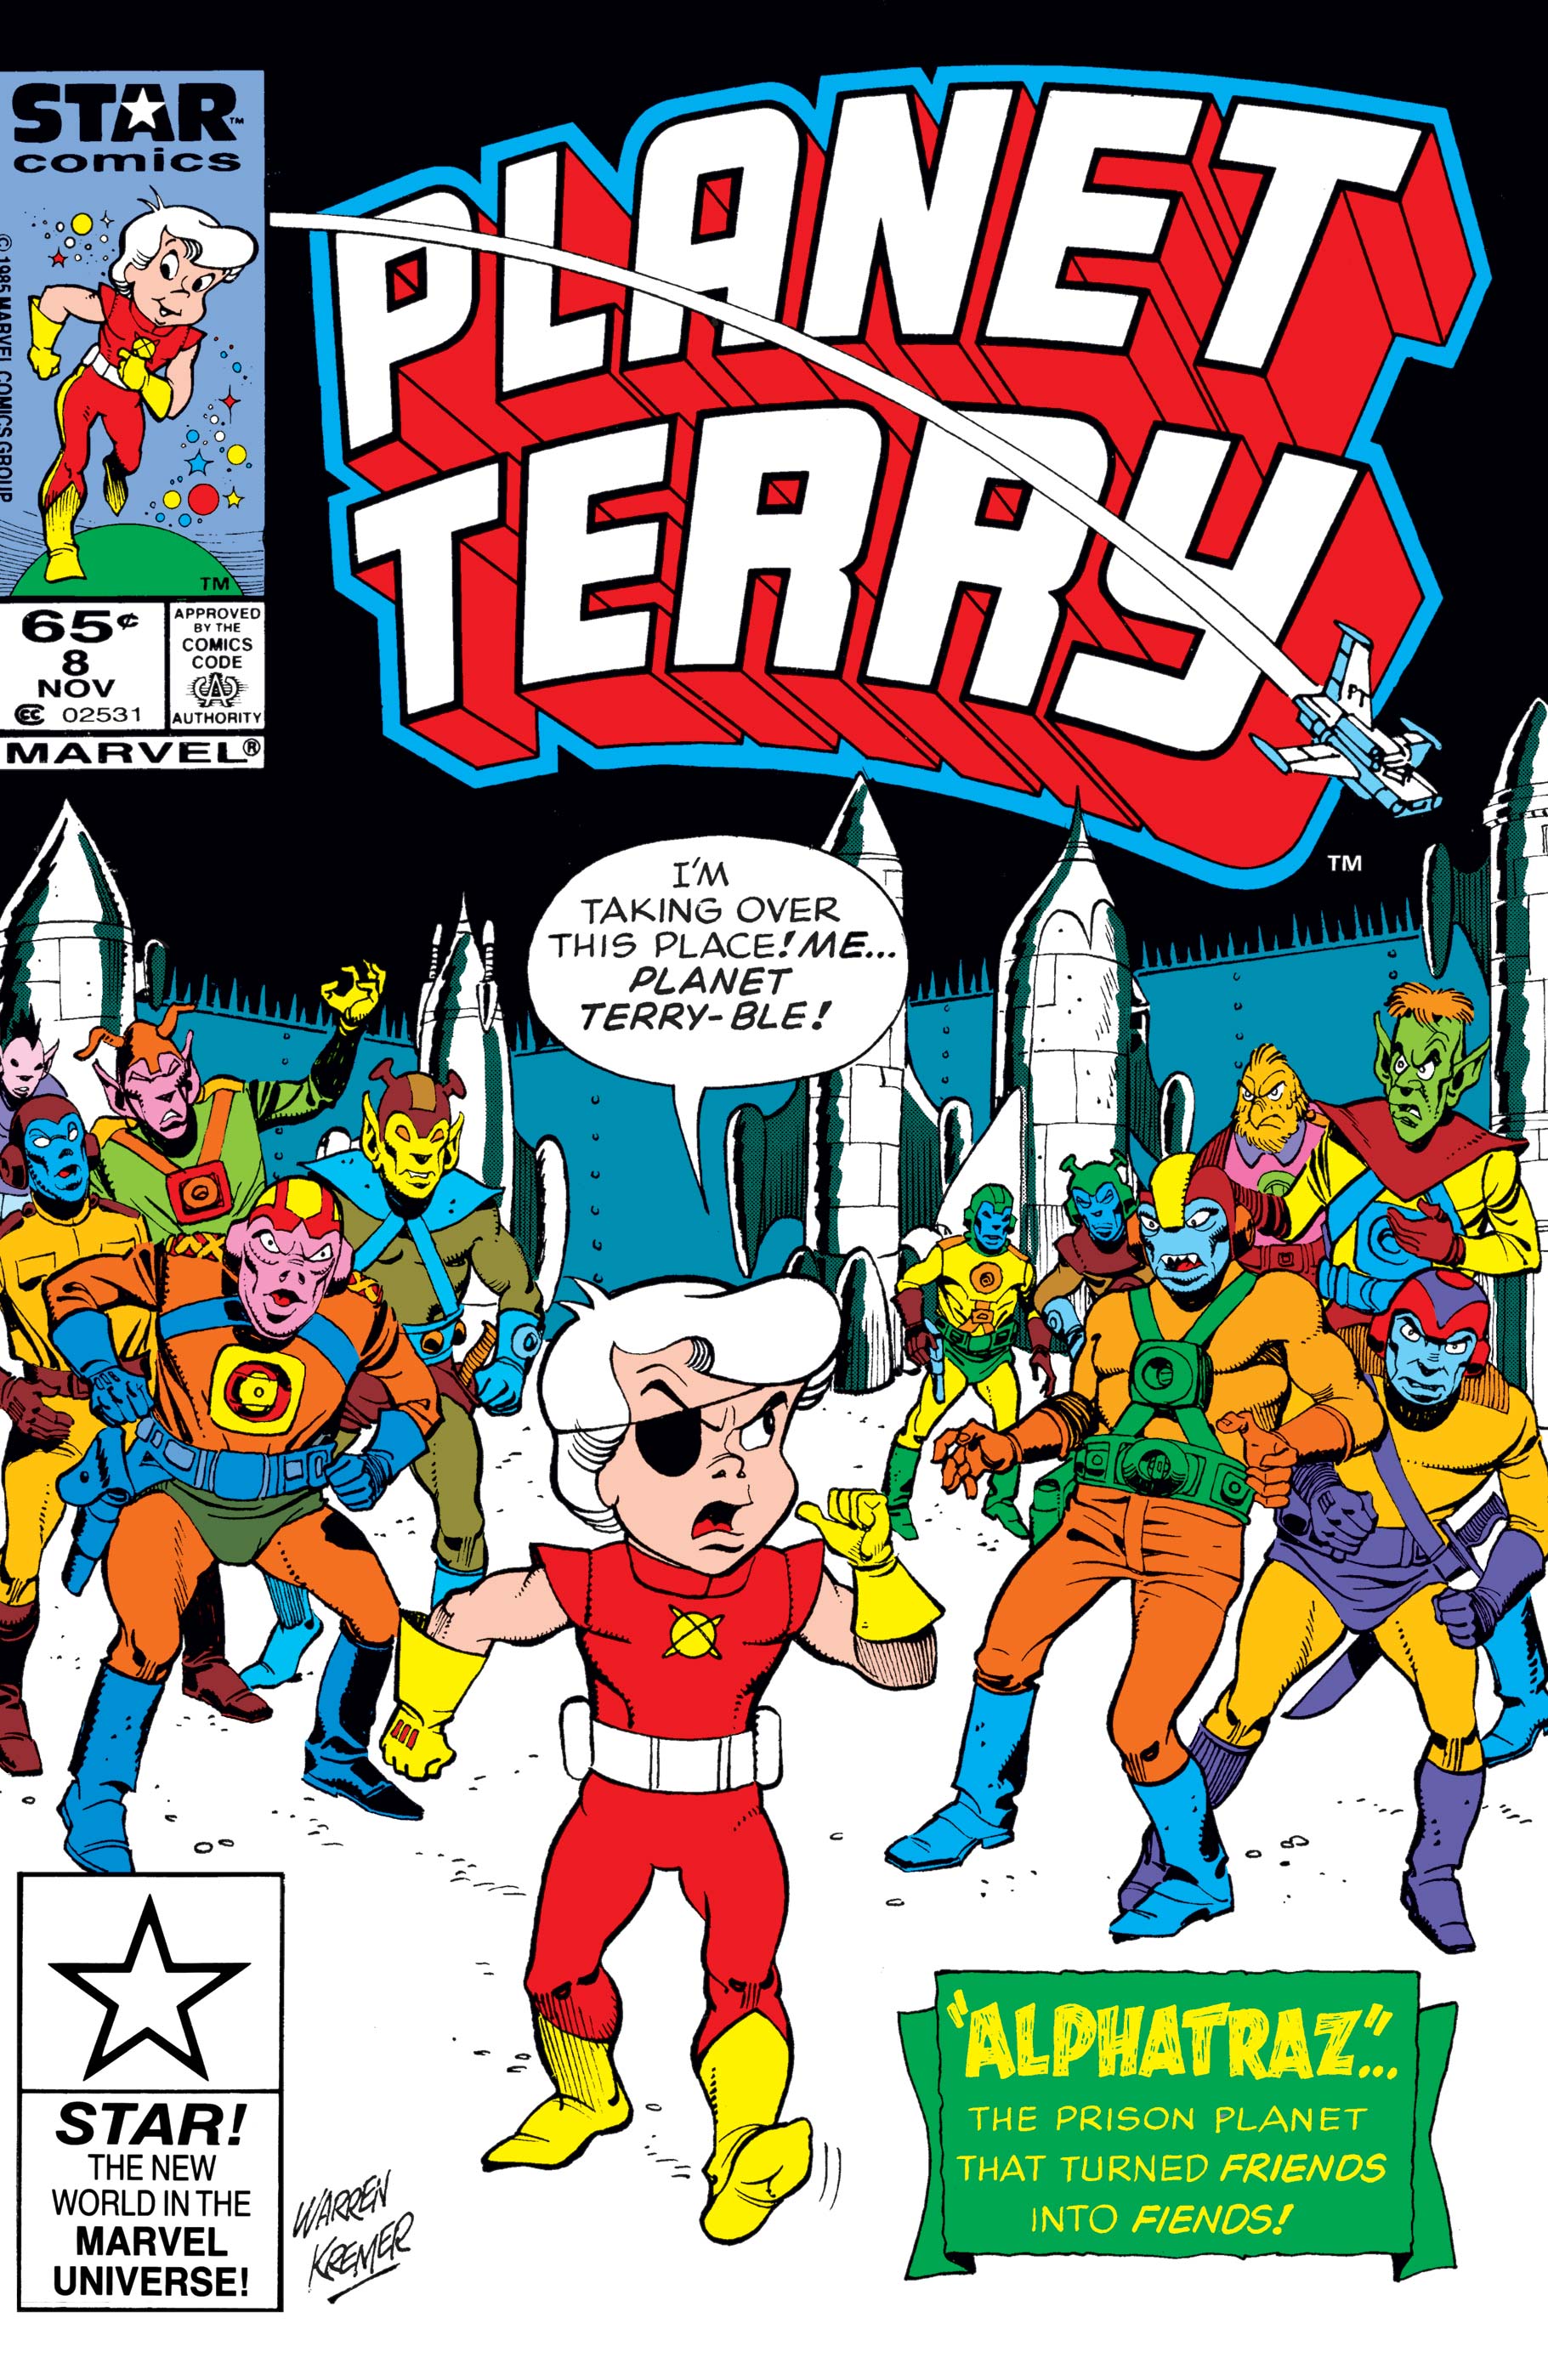 Planet Terry (1985) #8